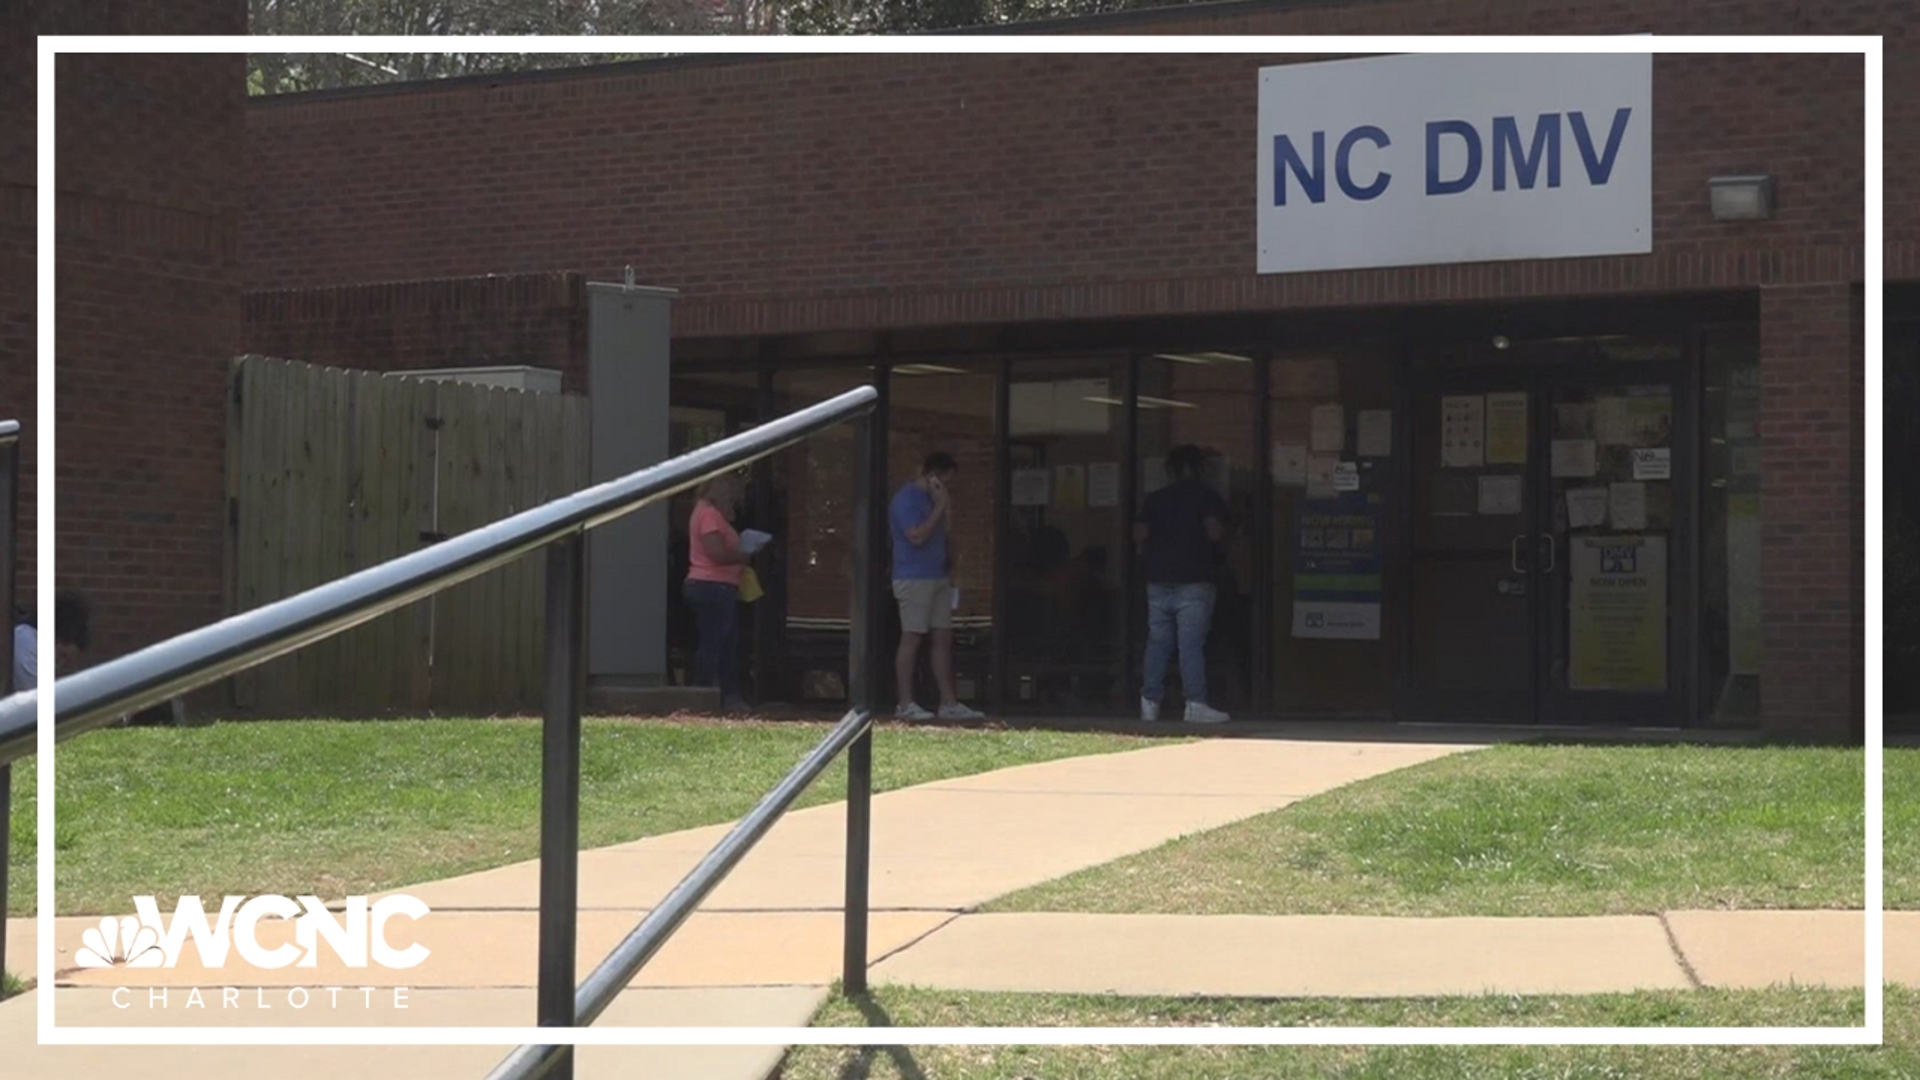 It comes as the state continues to face ID backlogs, which DMV leaders hope to clear by the end of the month.